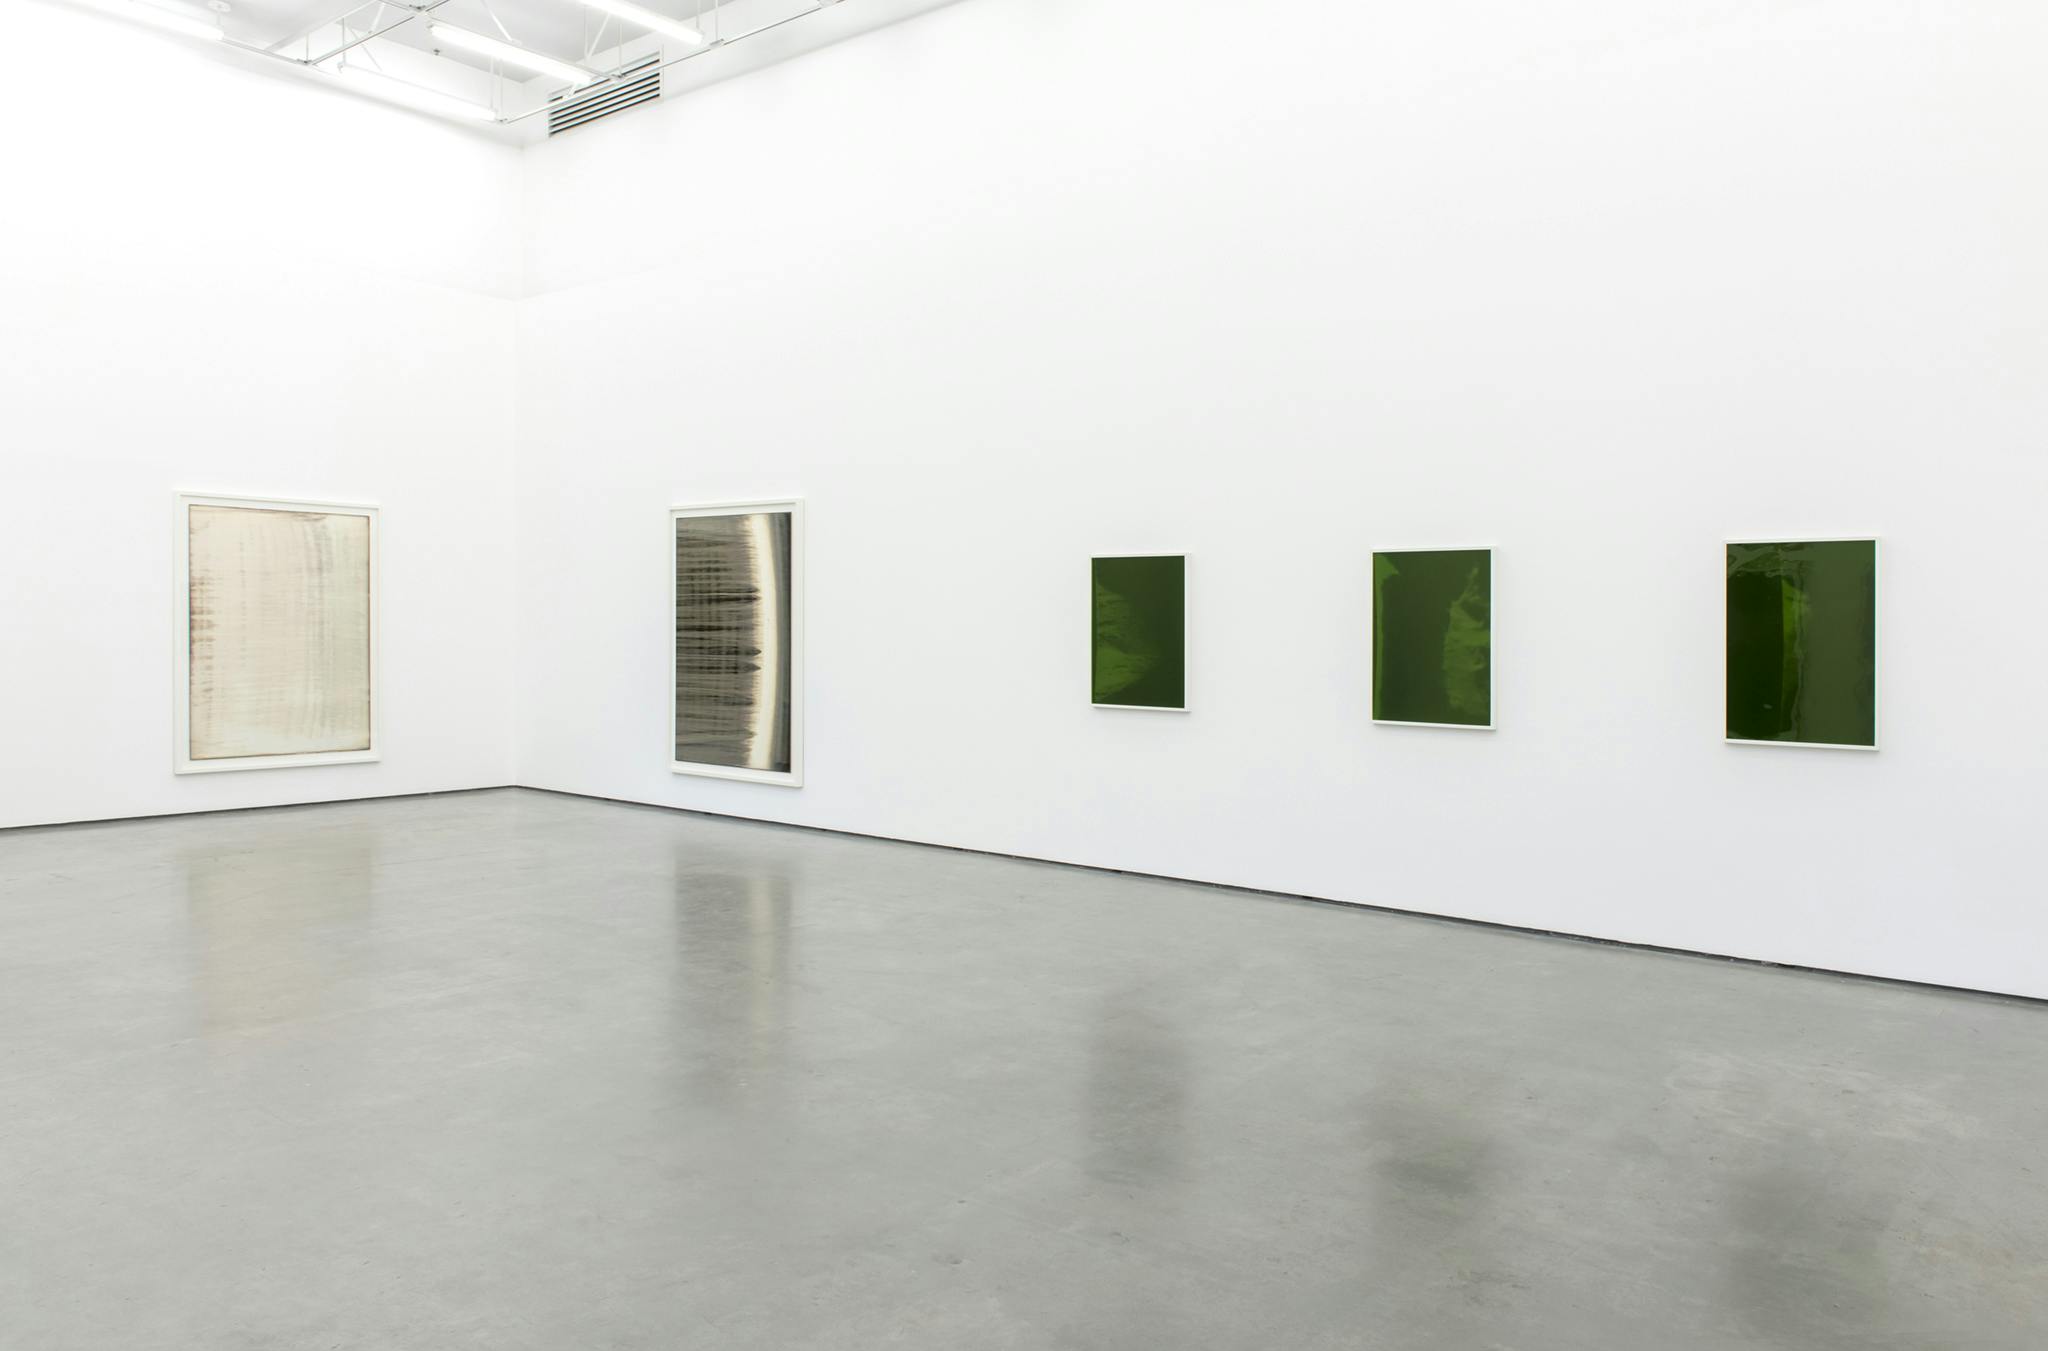 Five framed photographic prints hang on two walls of a gallery space. Two of the images are large-scale, lightly hued and abstract. The remaining three are deep green, smaller scale and abstract. 